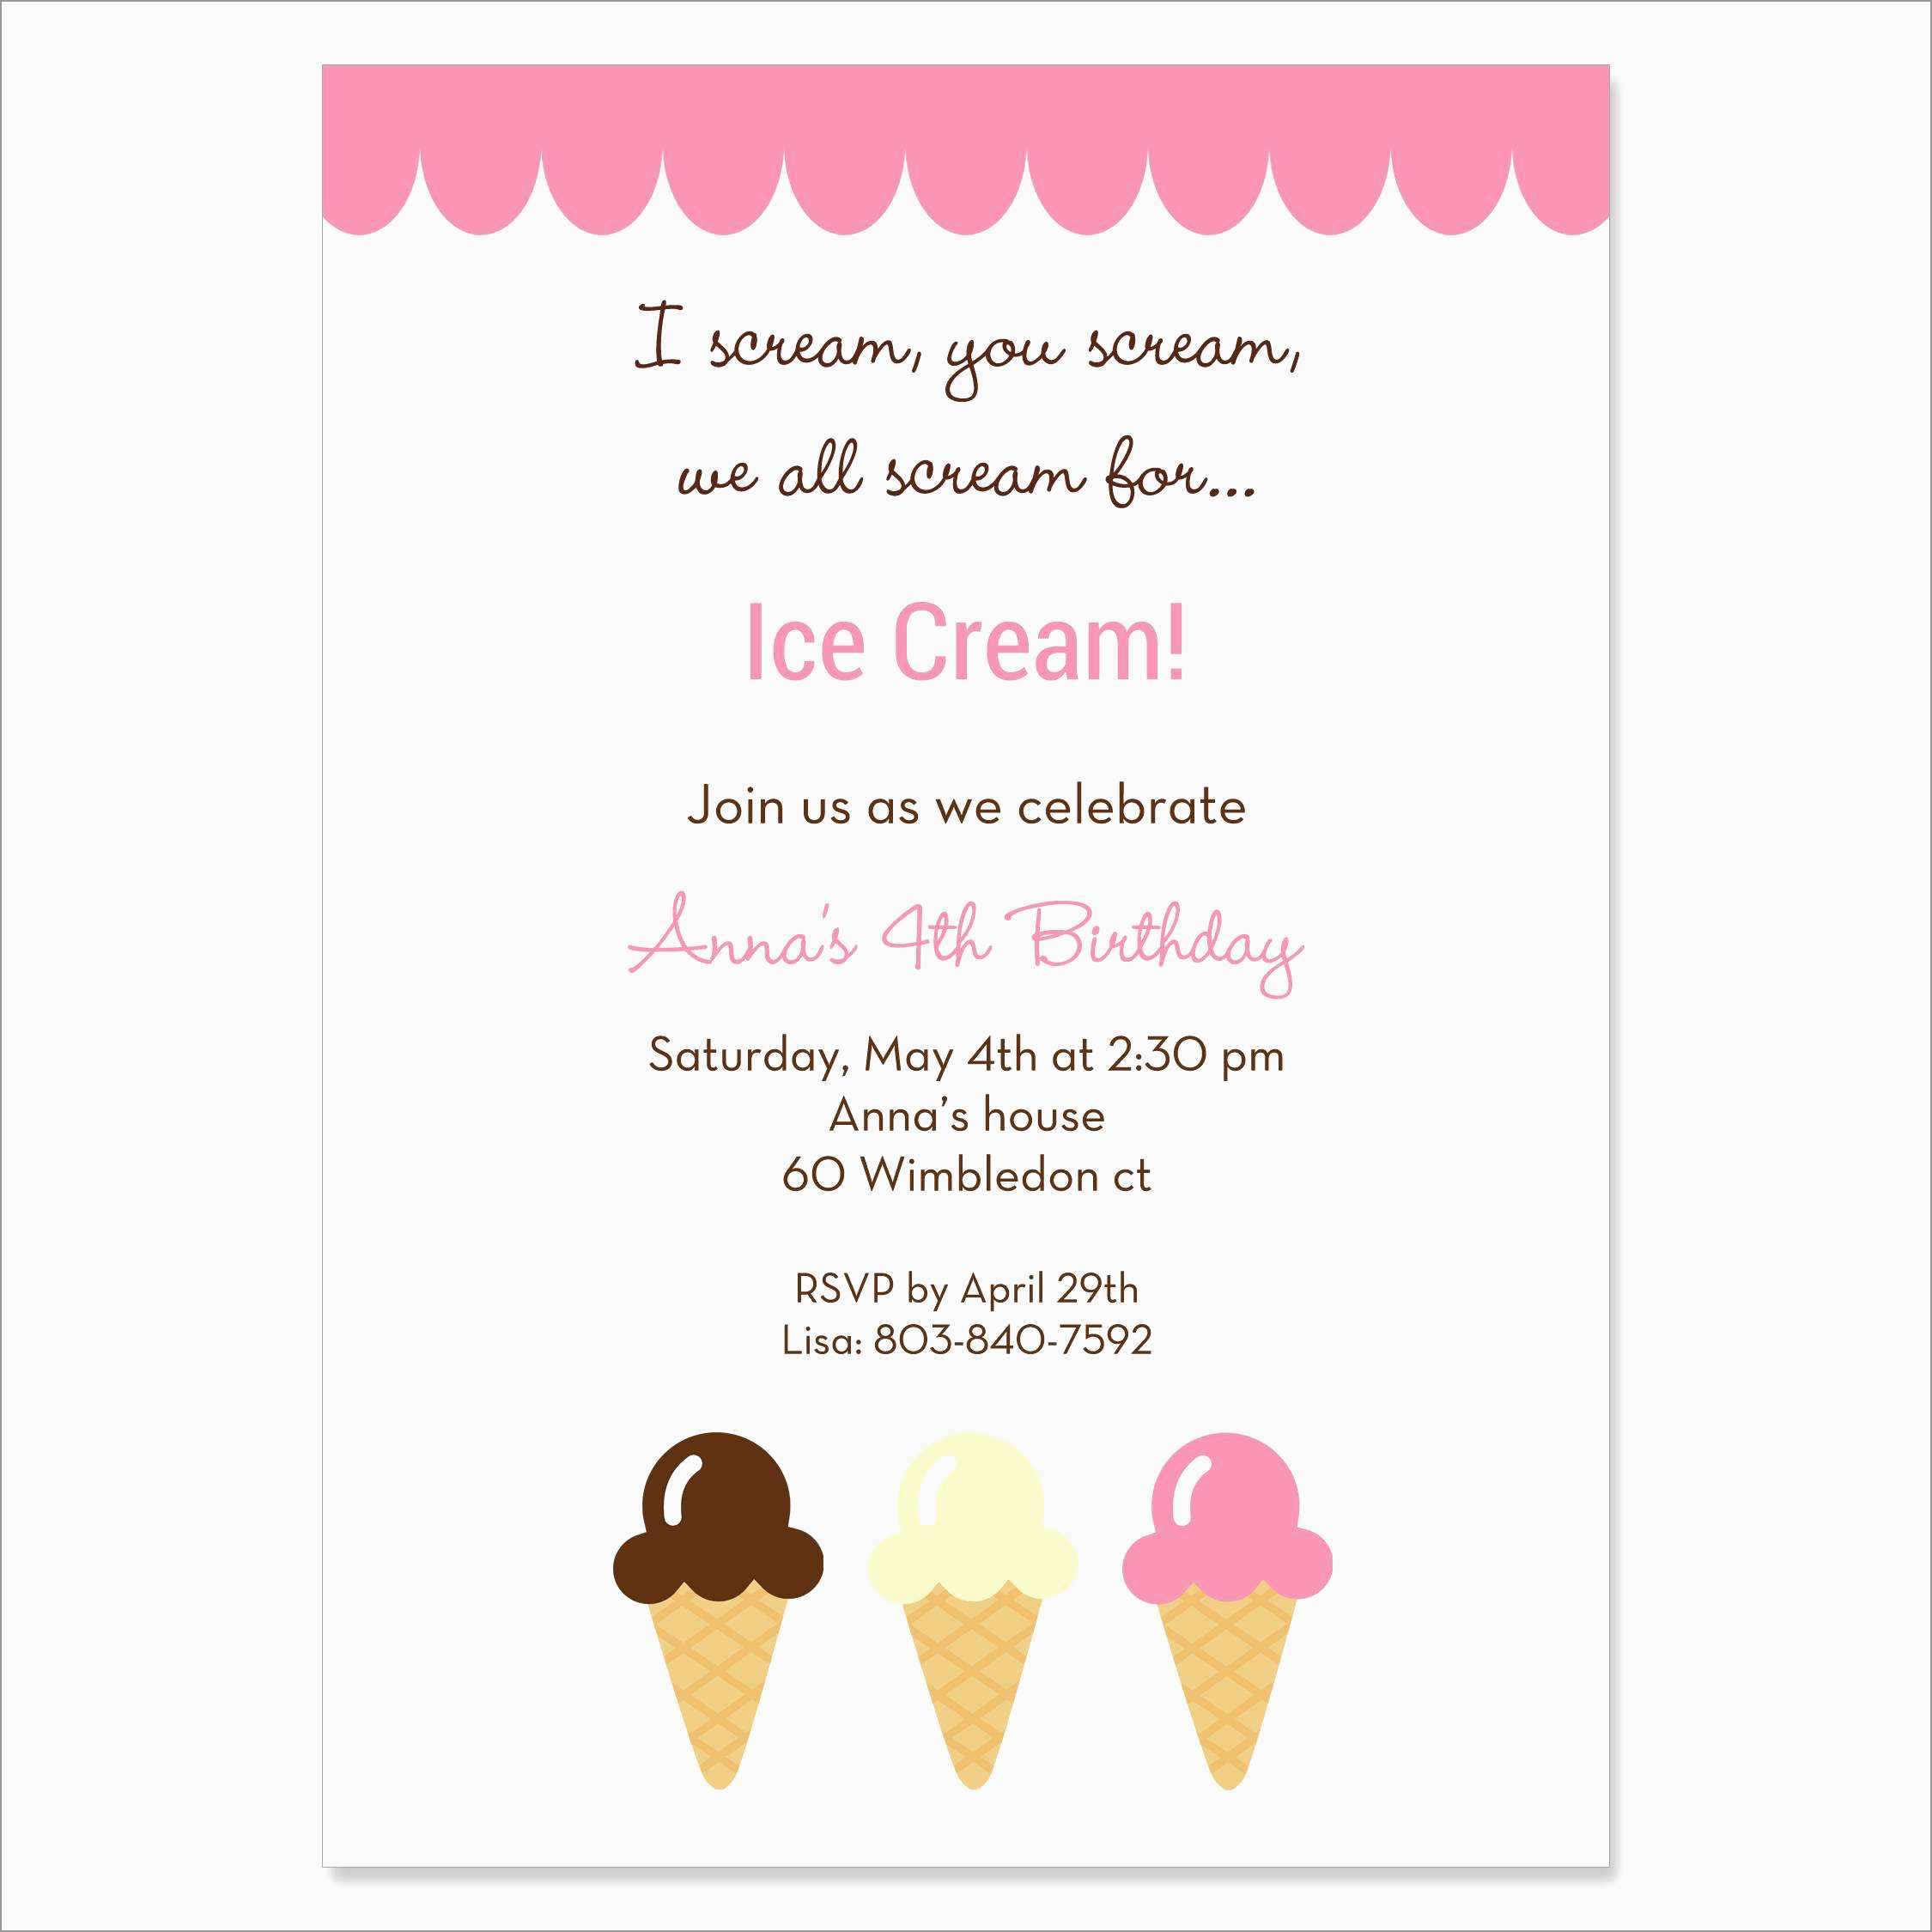 Ice Cream Social Invitation Template Free Prettier Best S Of Ice throughout sizing 2250 X 2250